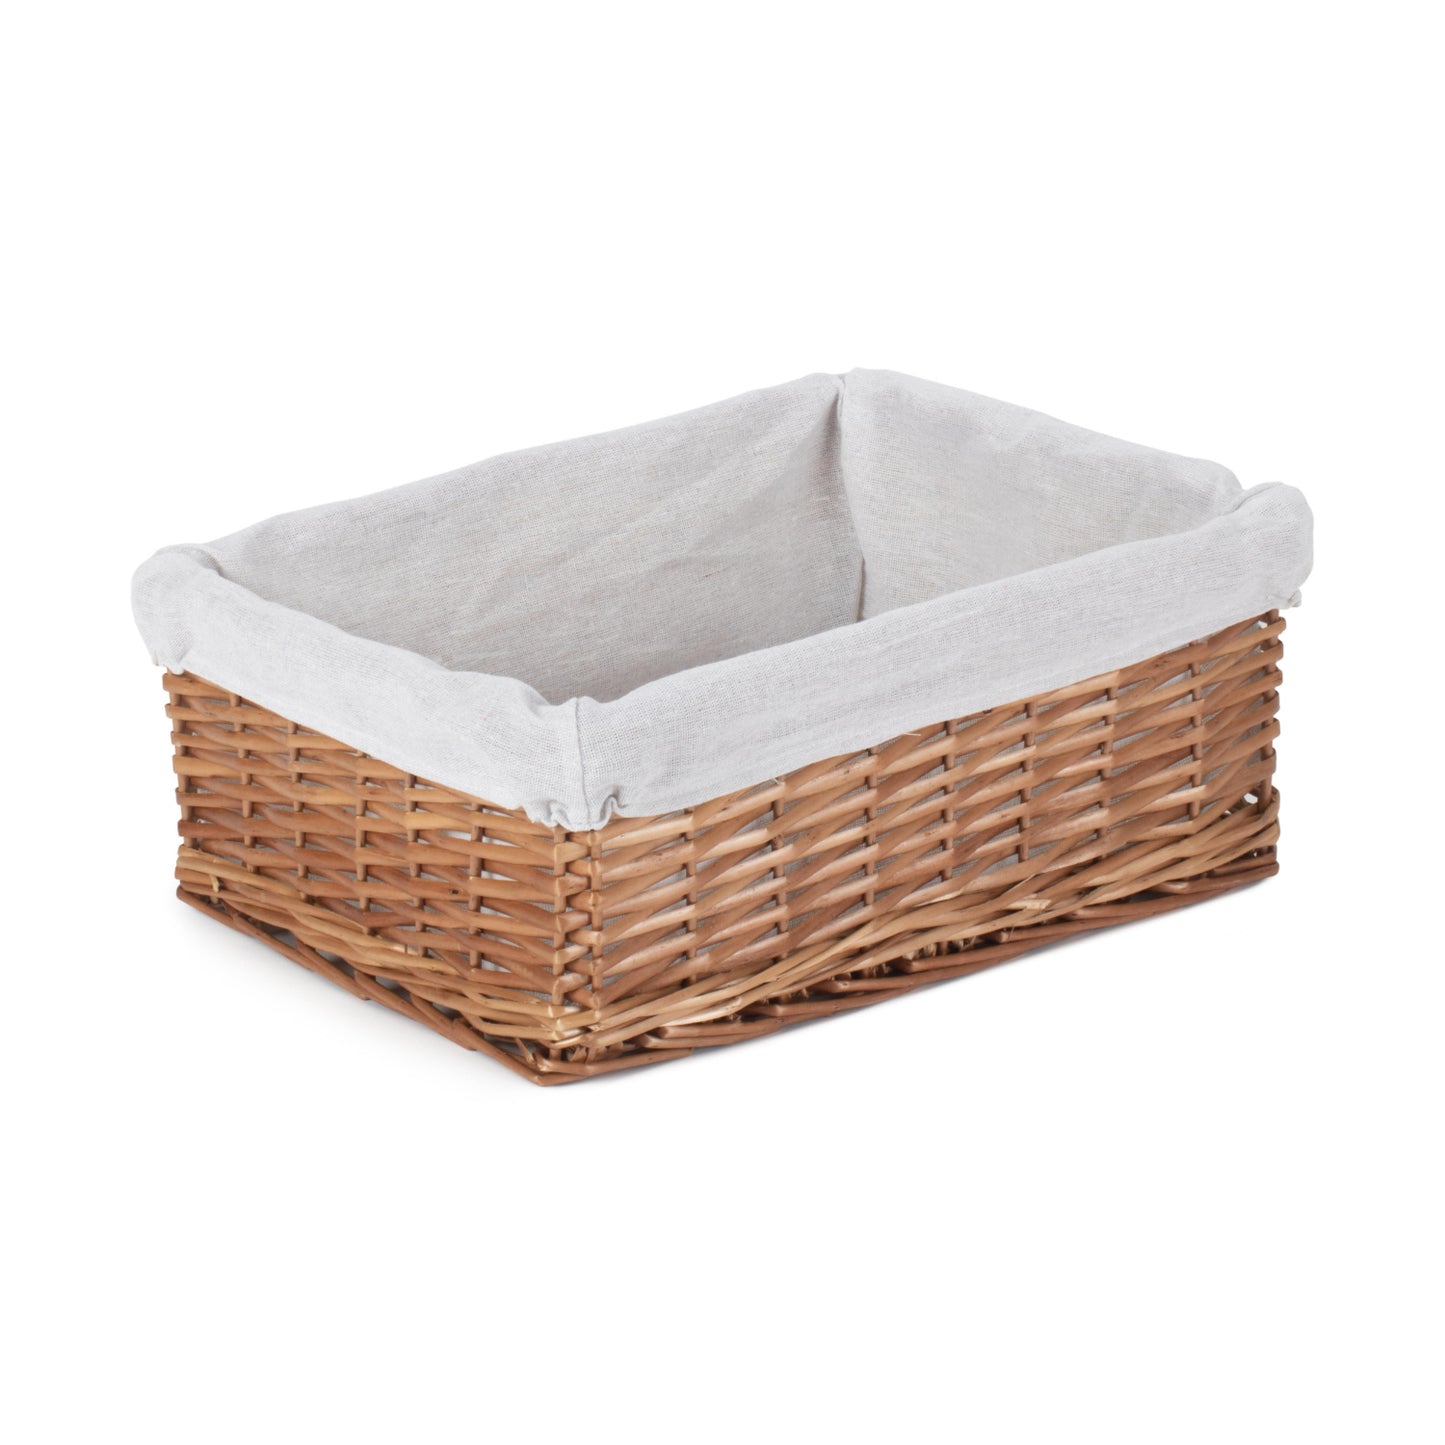 Large Double Steamed Wicker Storage Basket With White Lining